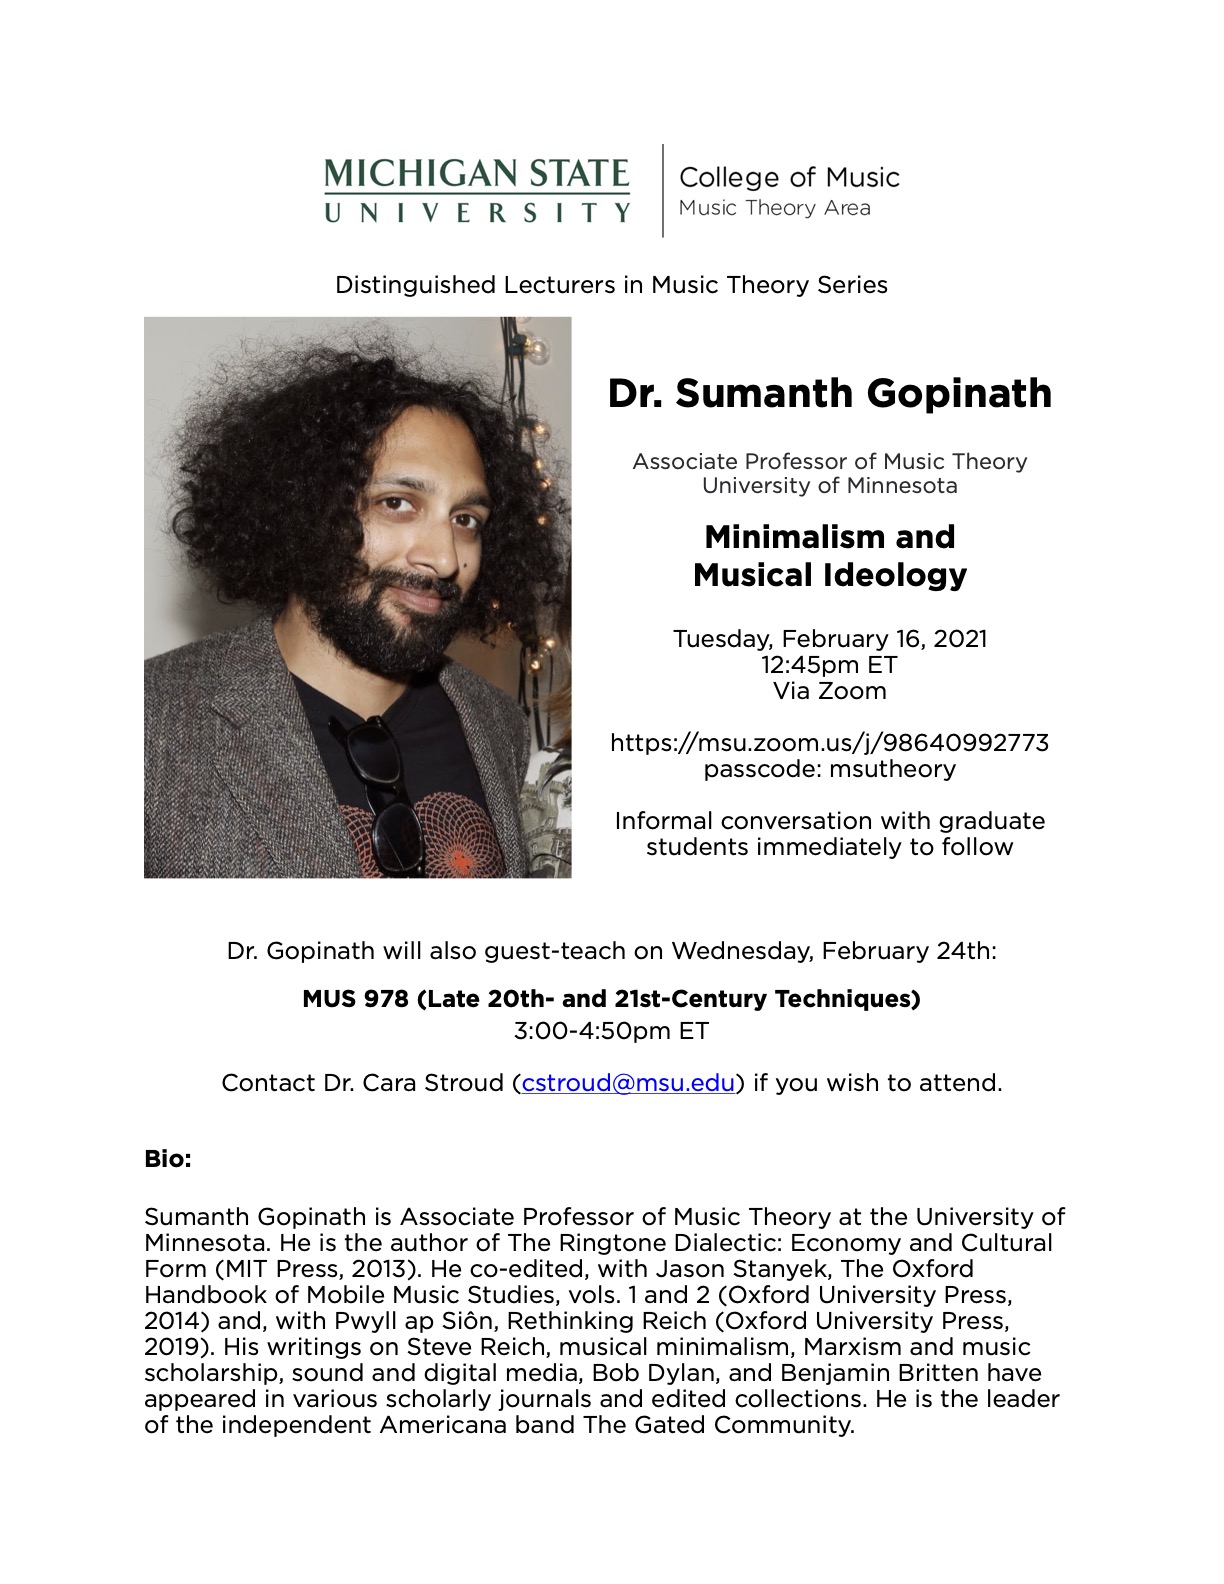 Gopinath lecture flyer